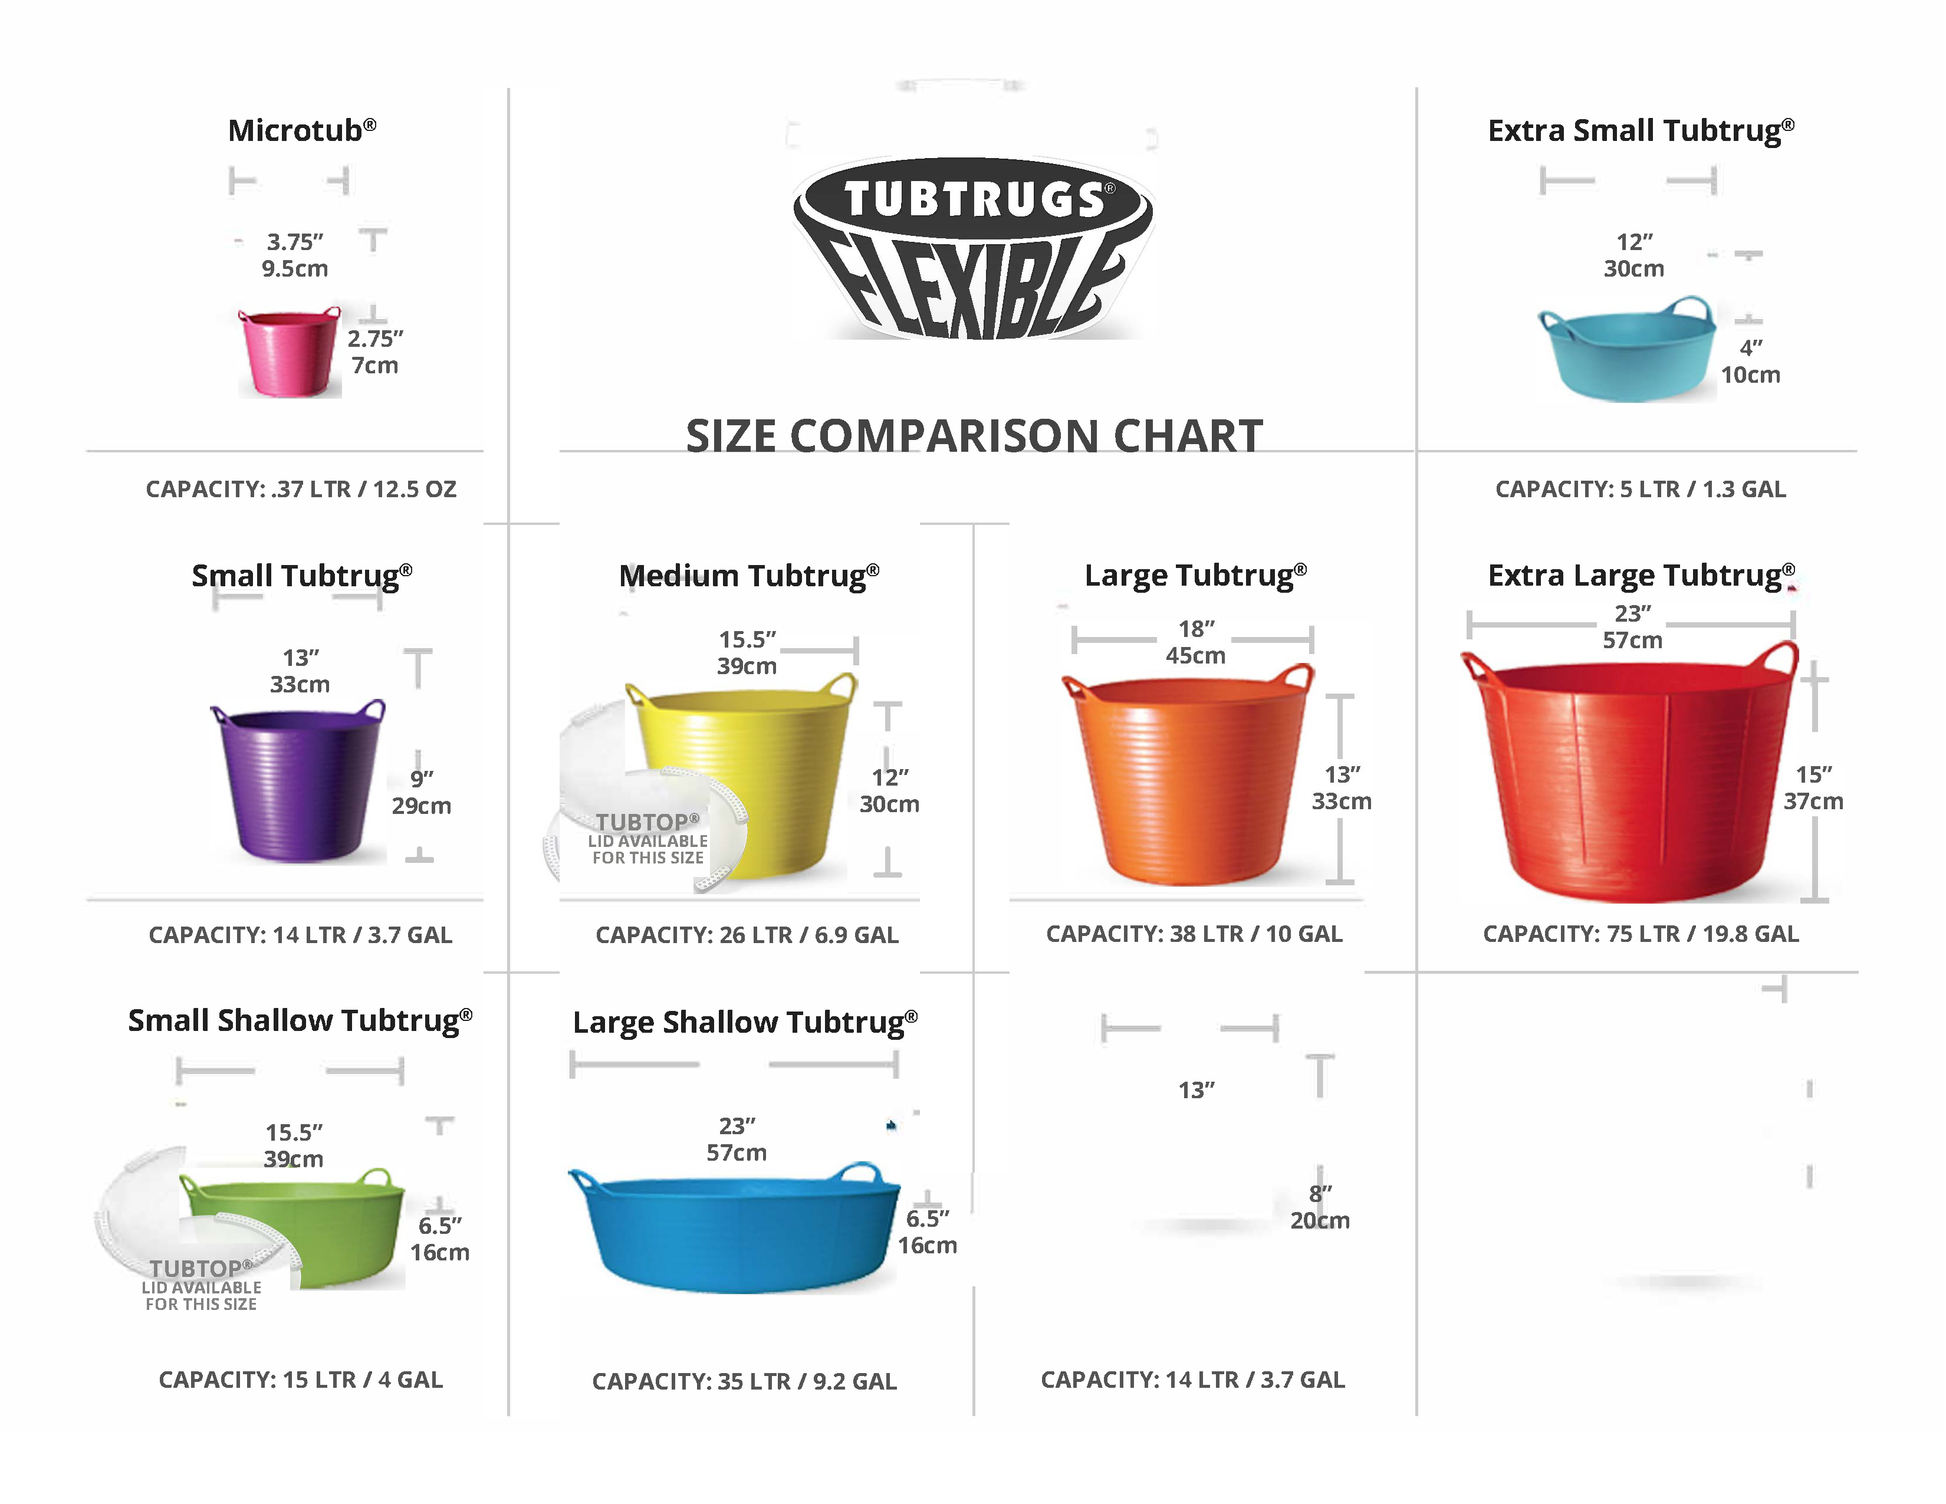 Tub Trug size chart so you can see all the measurements for each type.